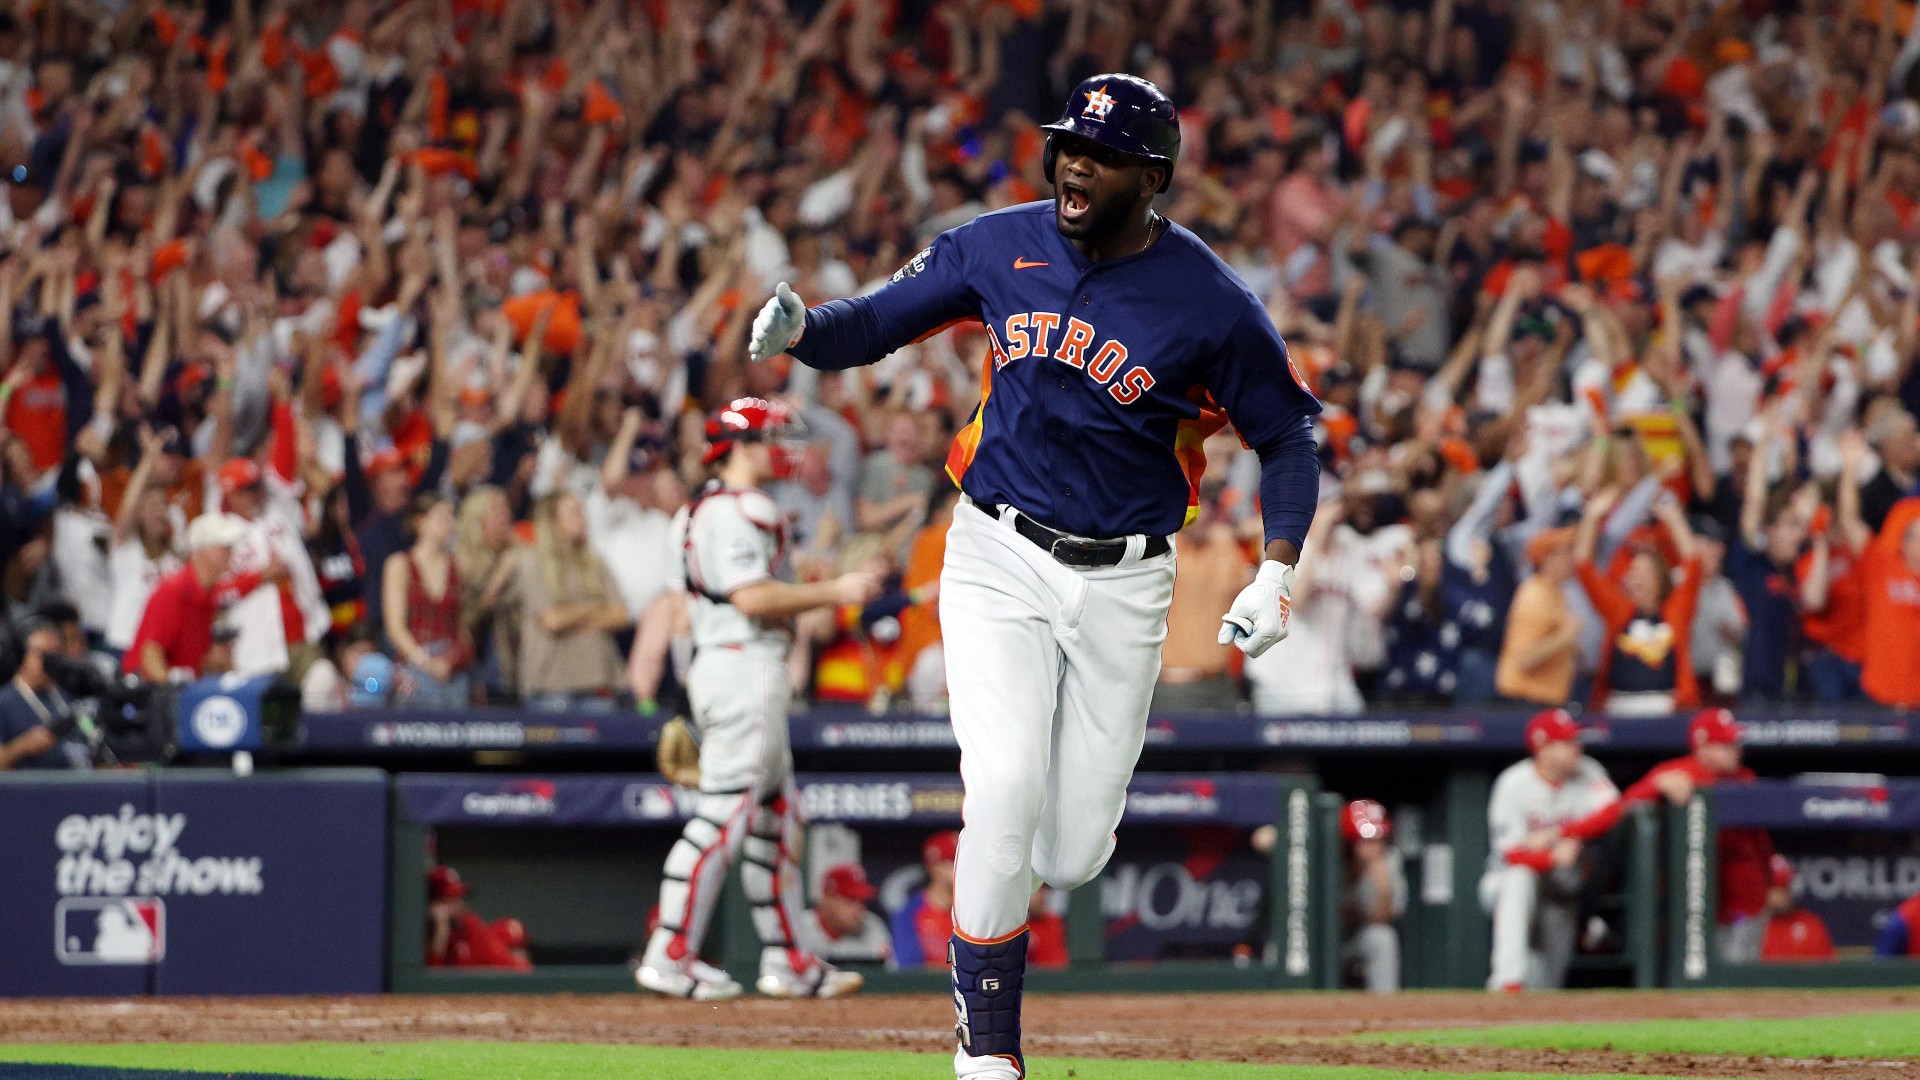 Astros defeat Phillies to win second World Series crown - The Japan Times